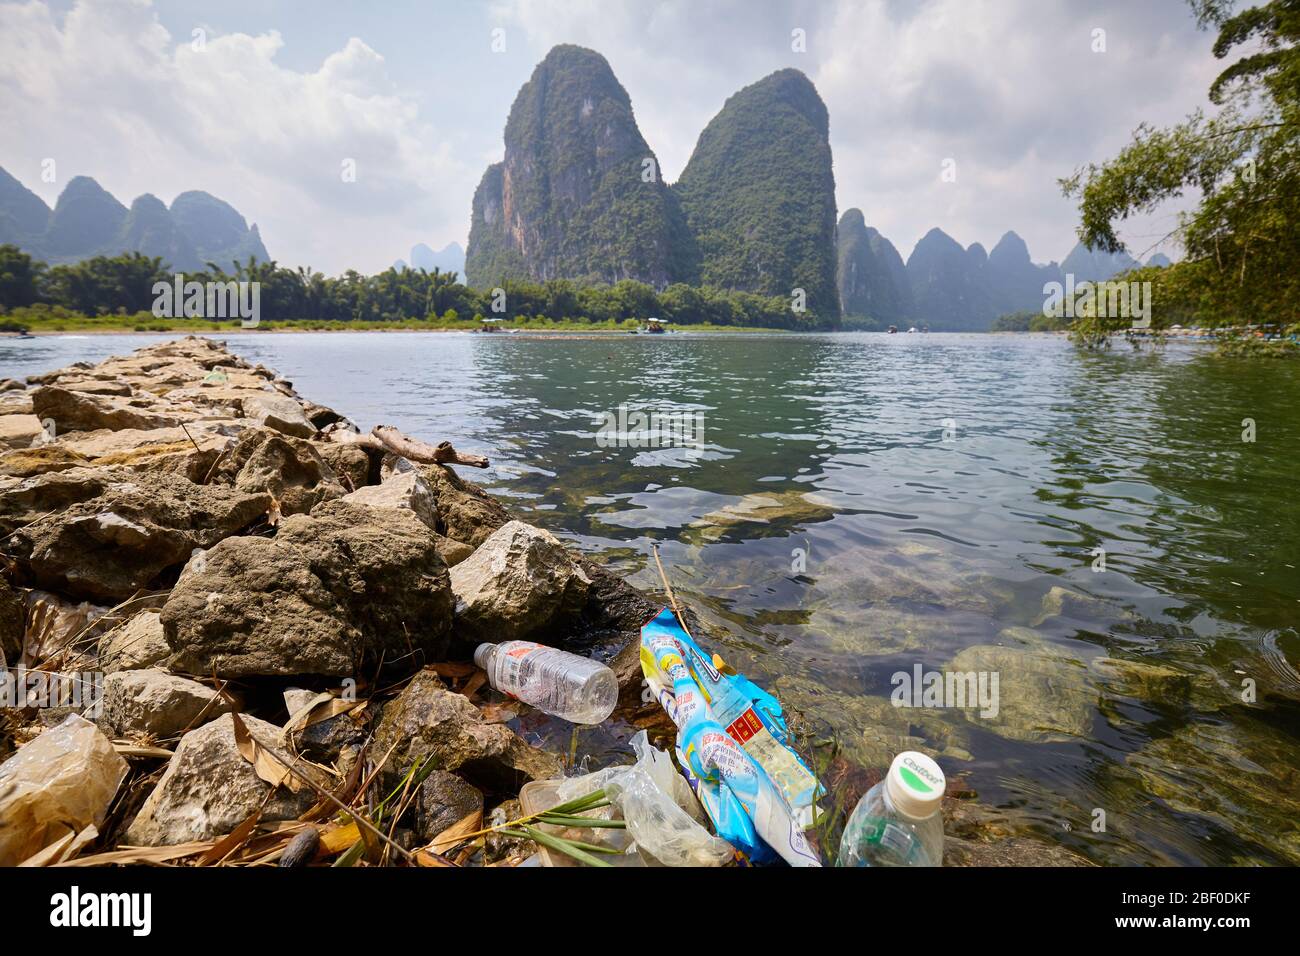 Xingping, China - September 18, 2017: Plastic garbage at the bank of Li River, one of China top tourist attractions. Stock Photo